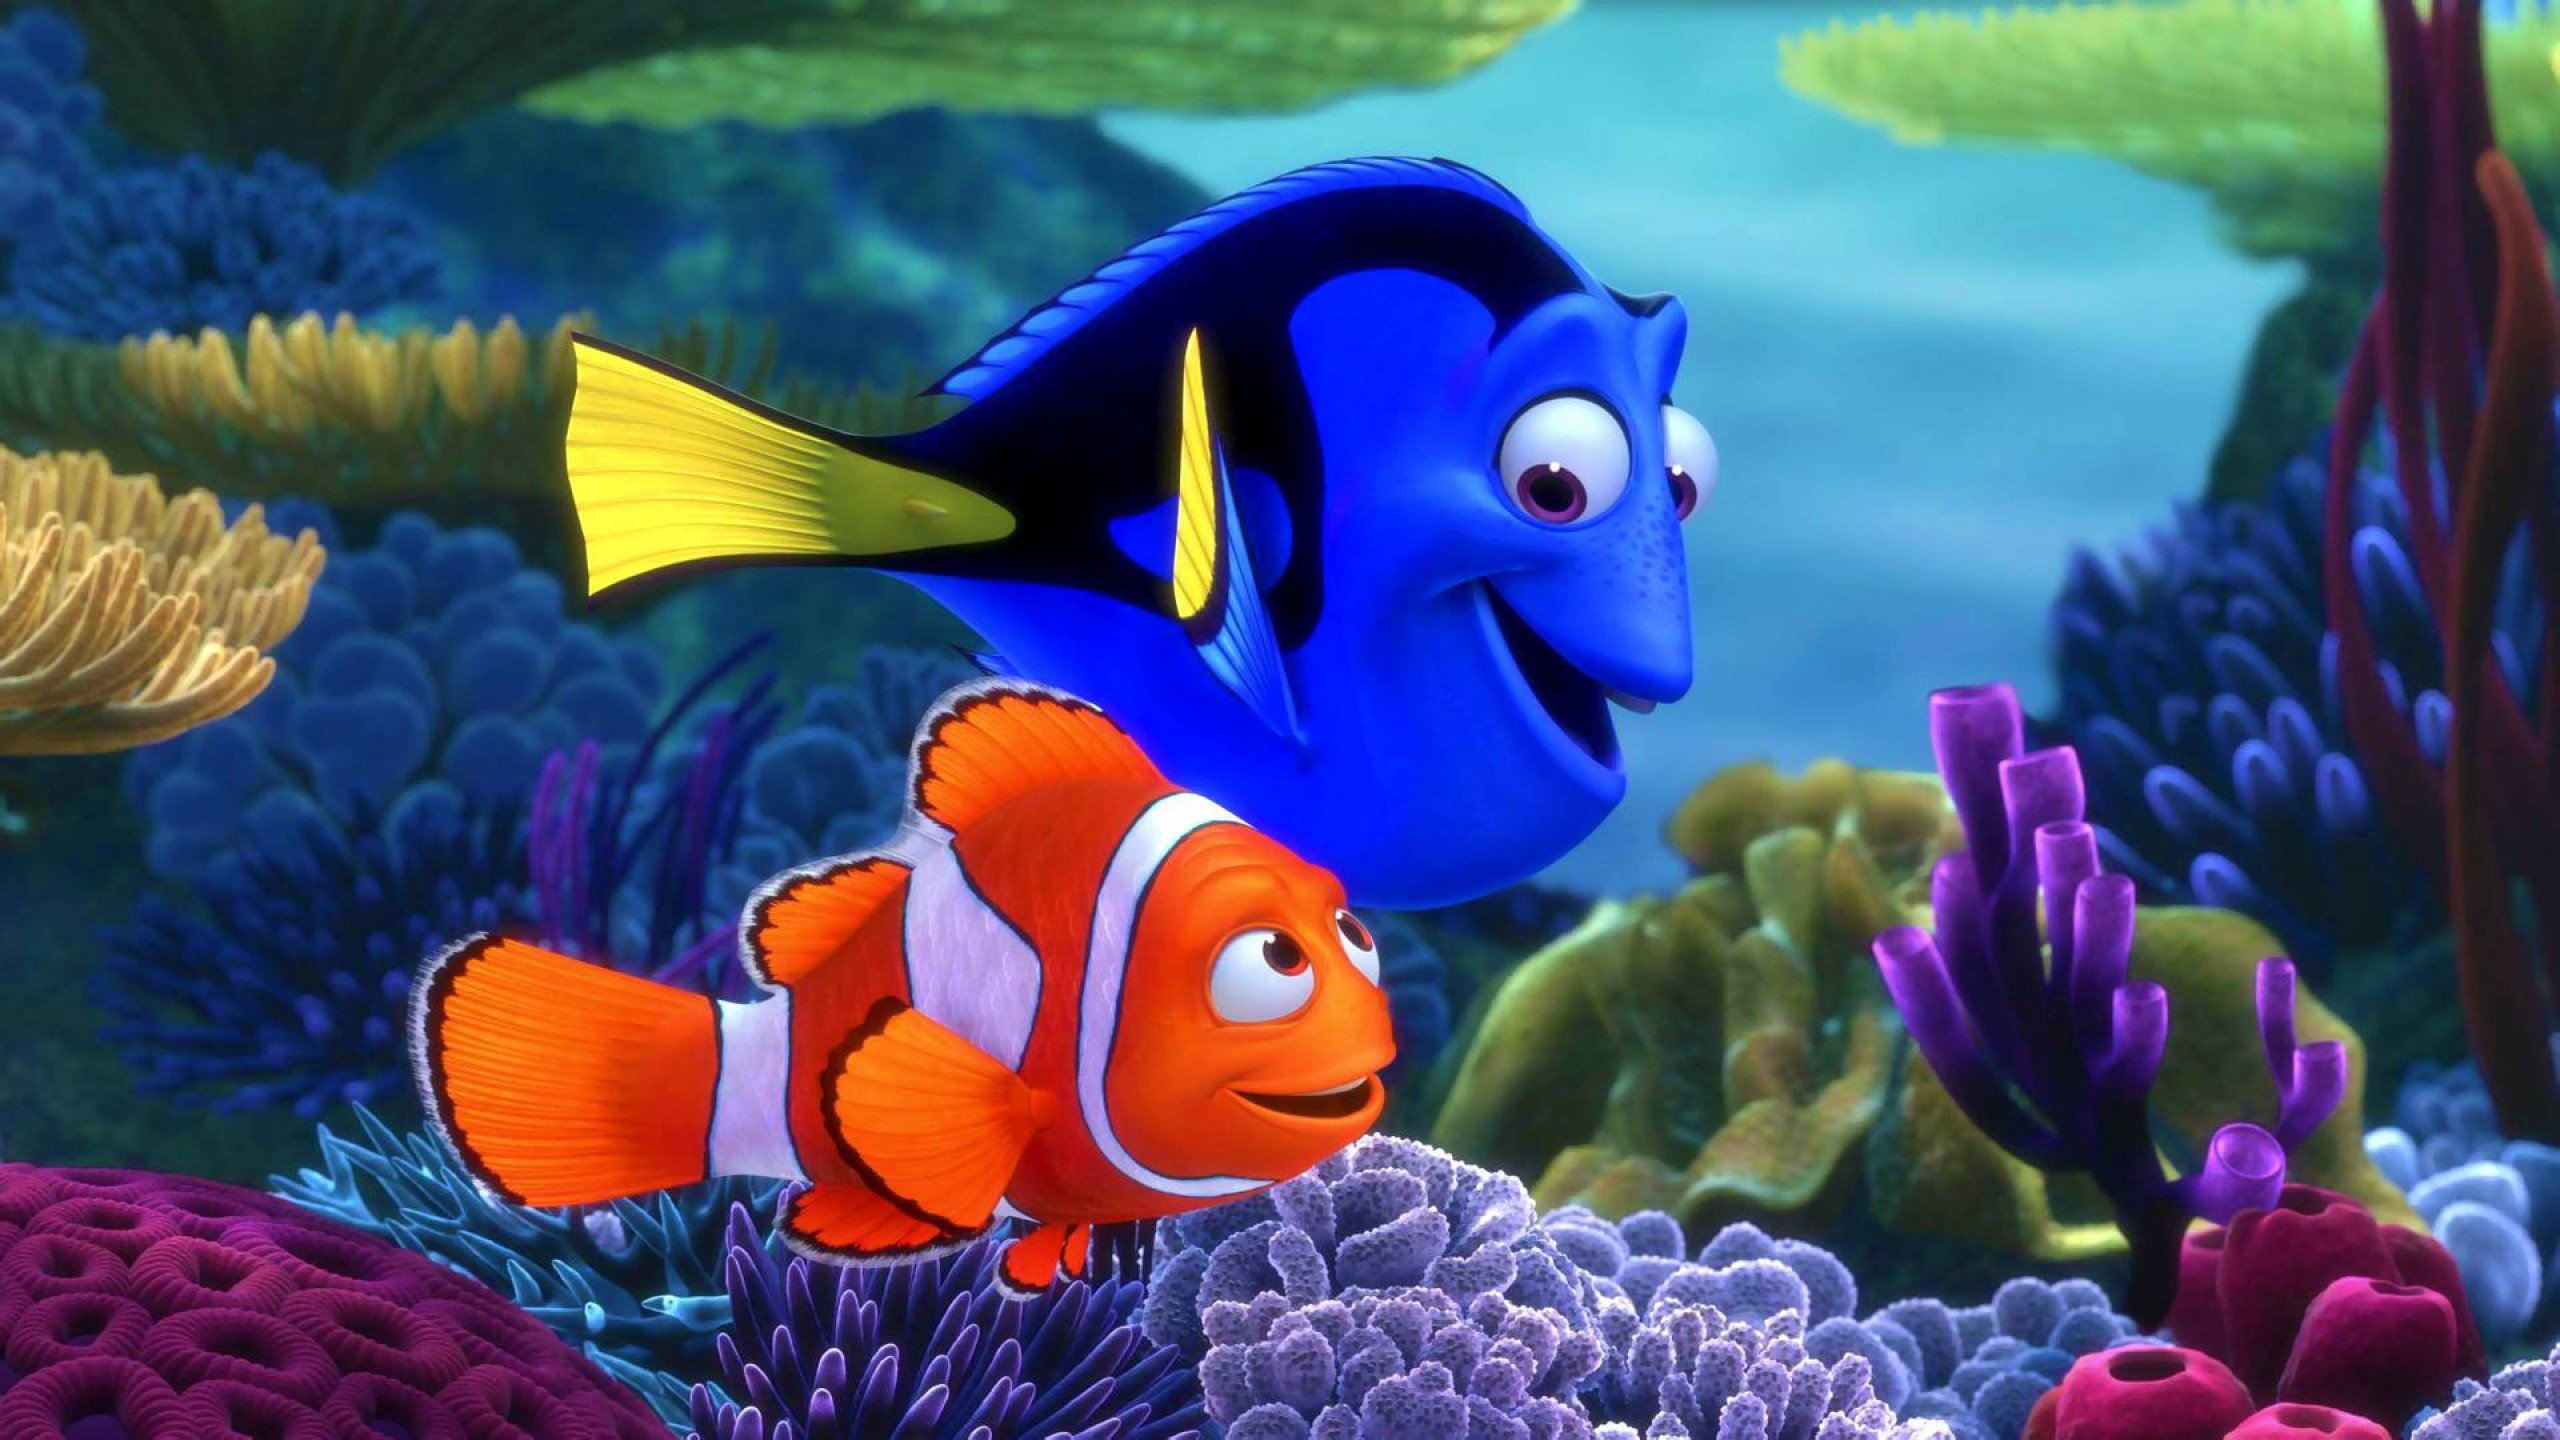 finding dory download free full movie